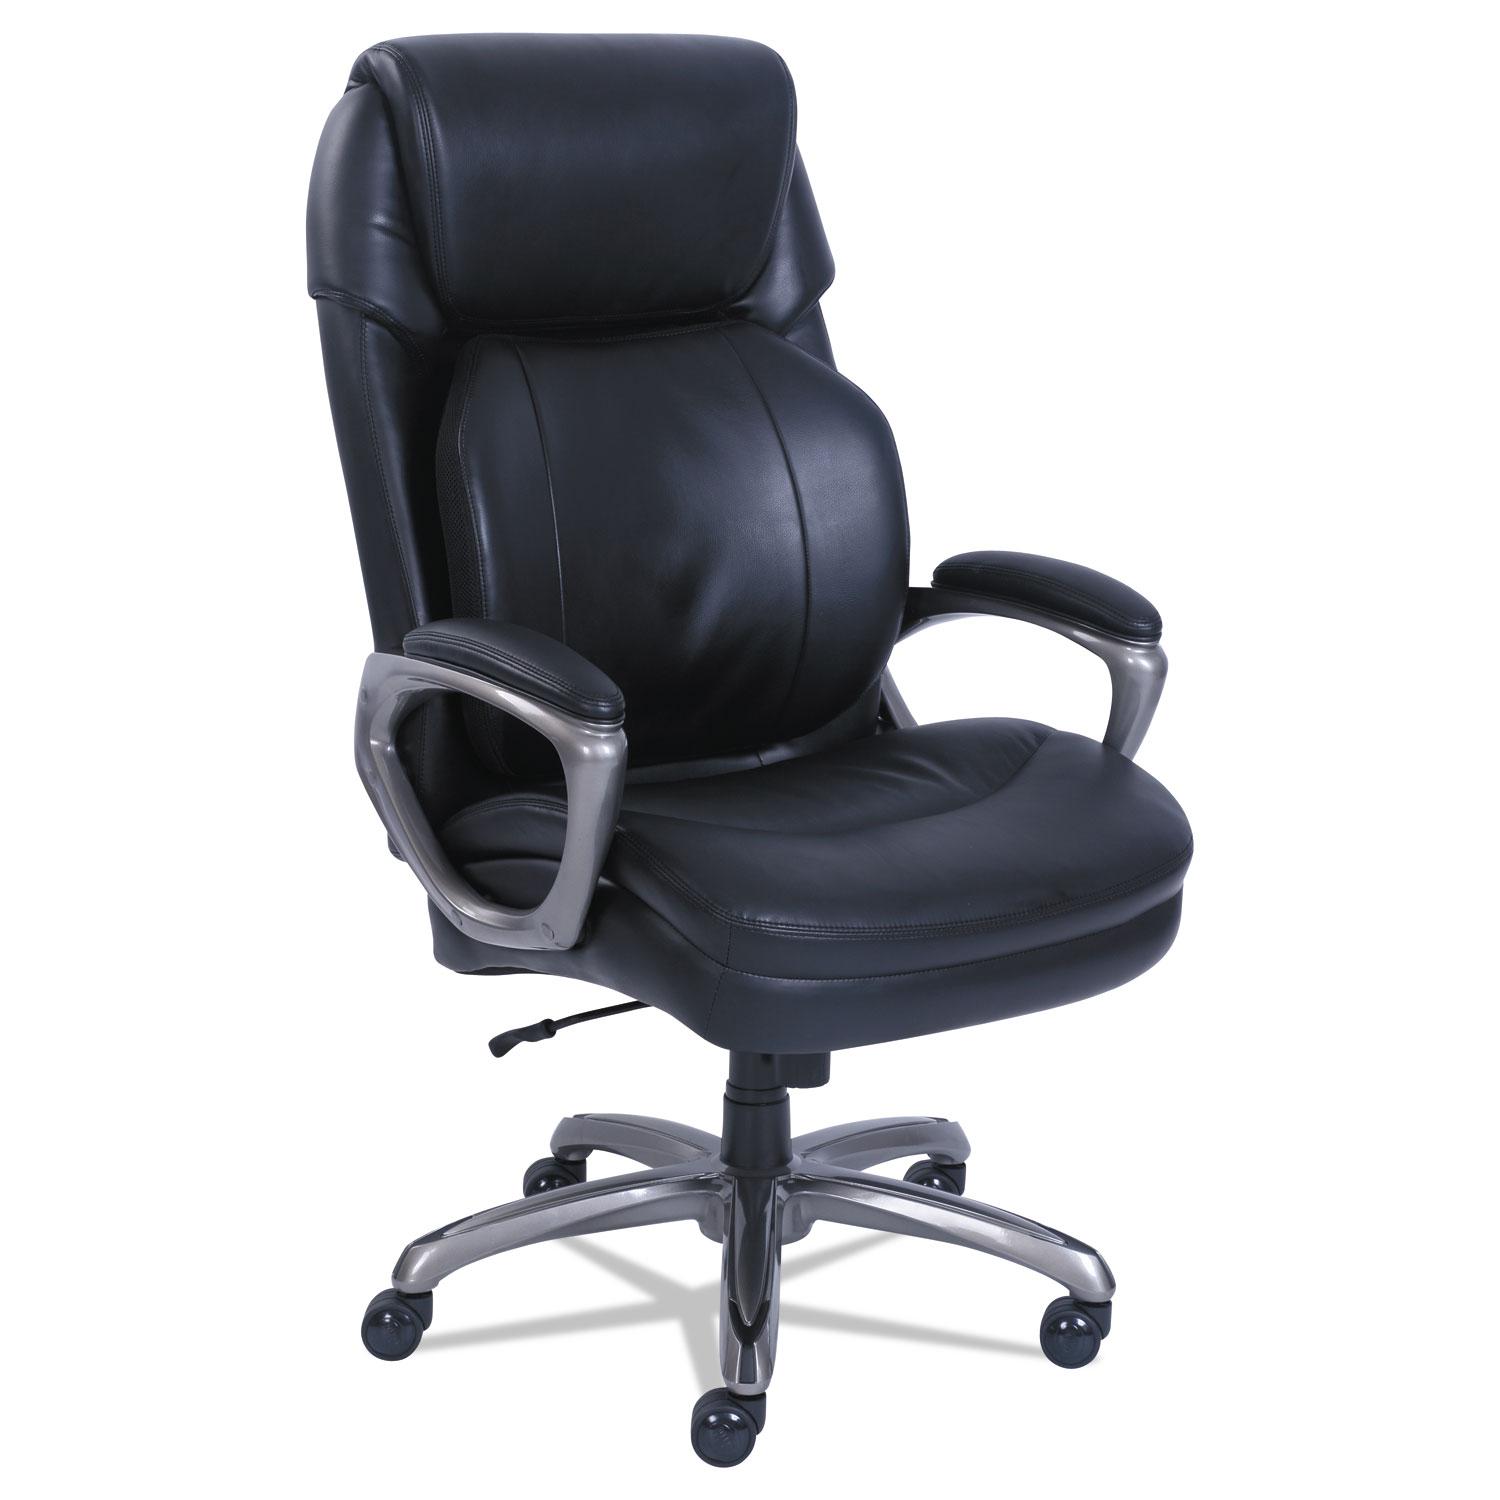  SertaPedic 48964 Cosset Big and Tall Executive Chair, Supports up to 400 lbs., Black Seat/Black Back, Slate Base (SRJ48964) 